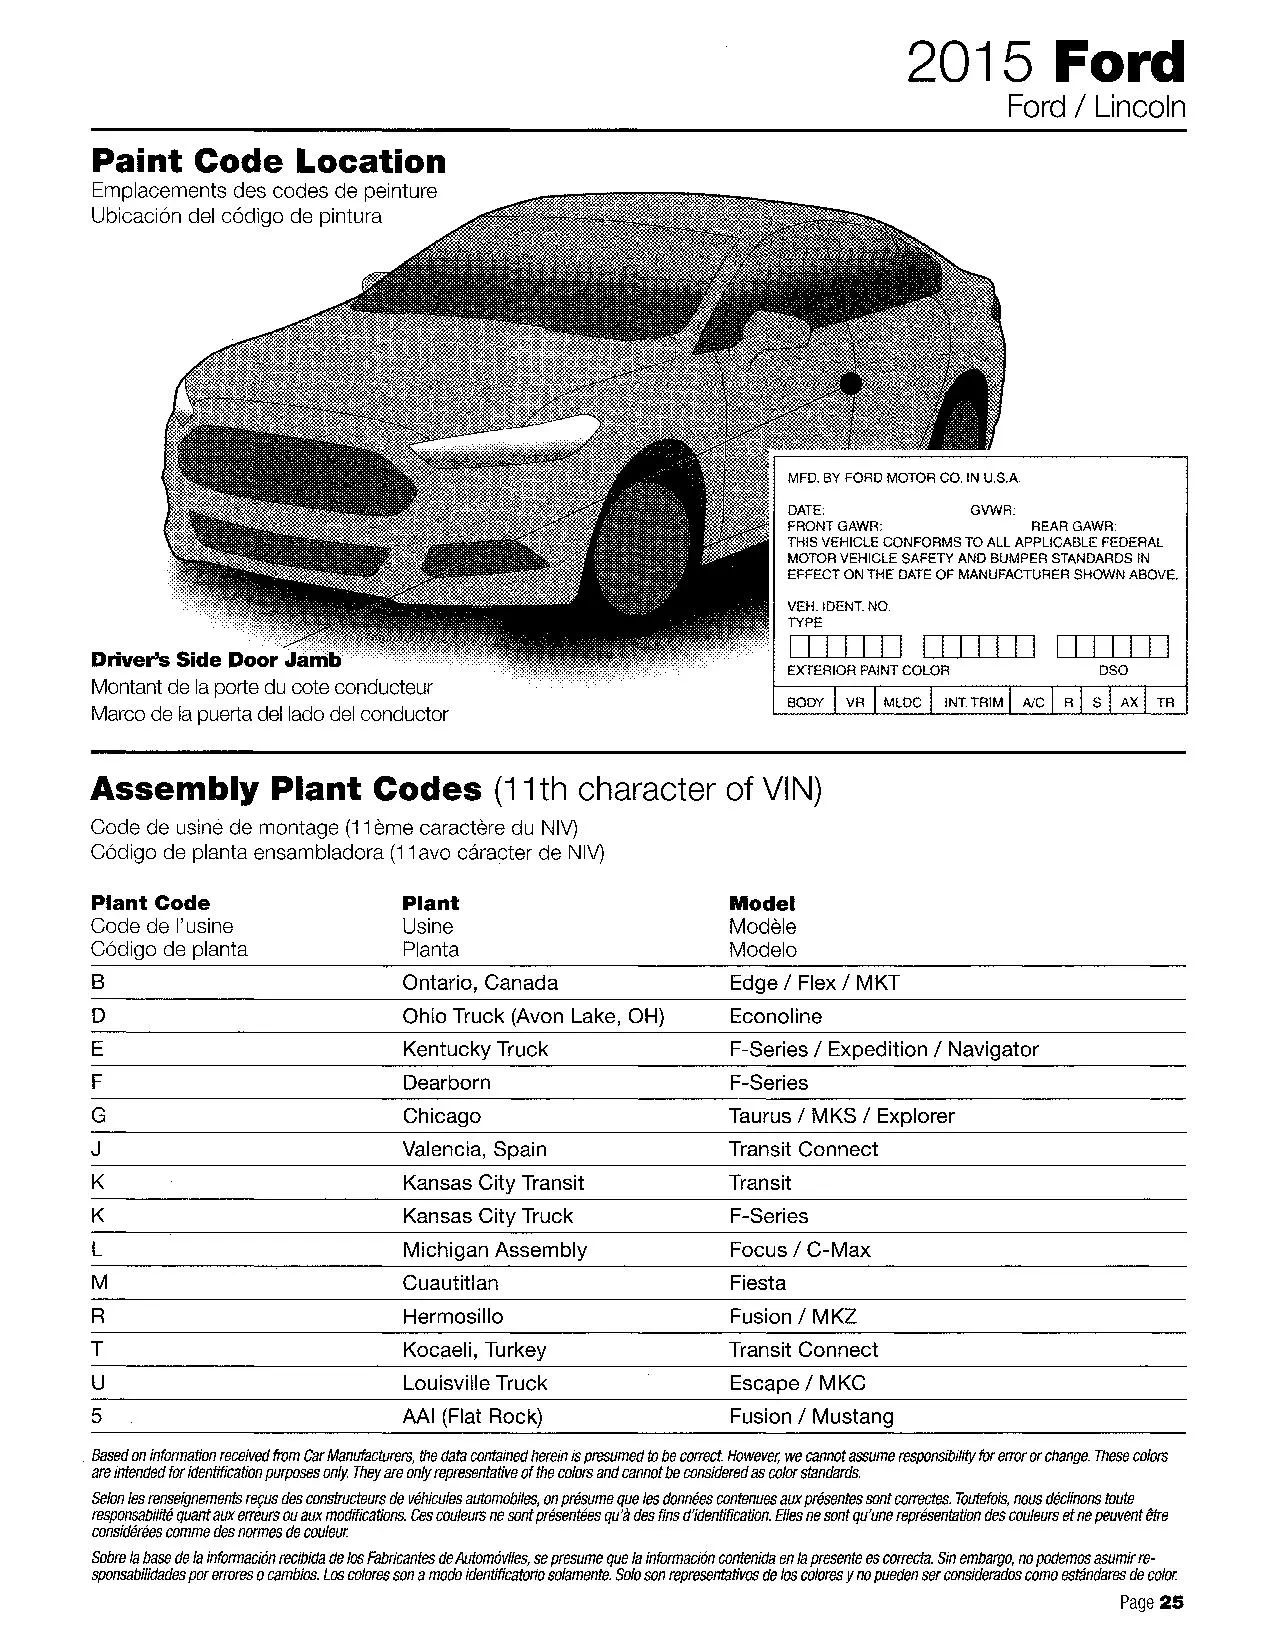 2015 ford and lincoln paint code location